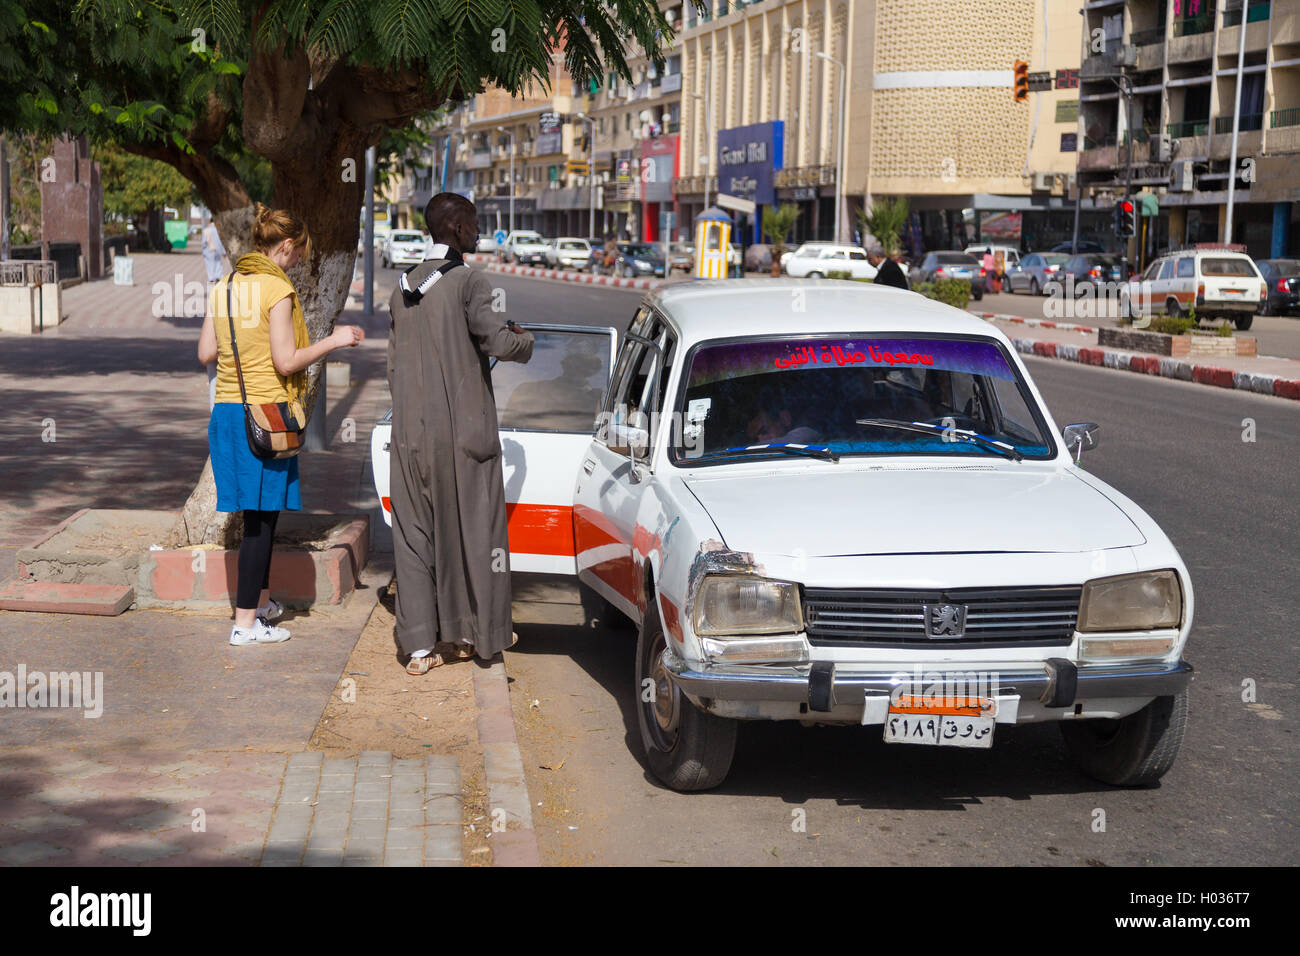 ASWAN, EGYPT - FEBRUARY 5, 2016: People entering old Peugeot 504 taxi at street. Stock Photo